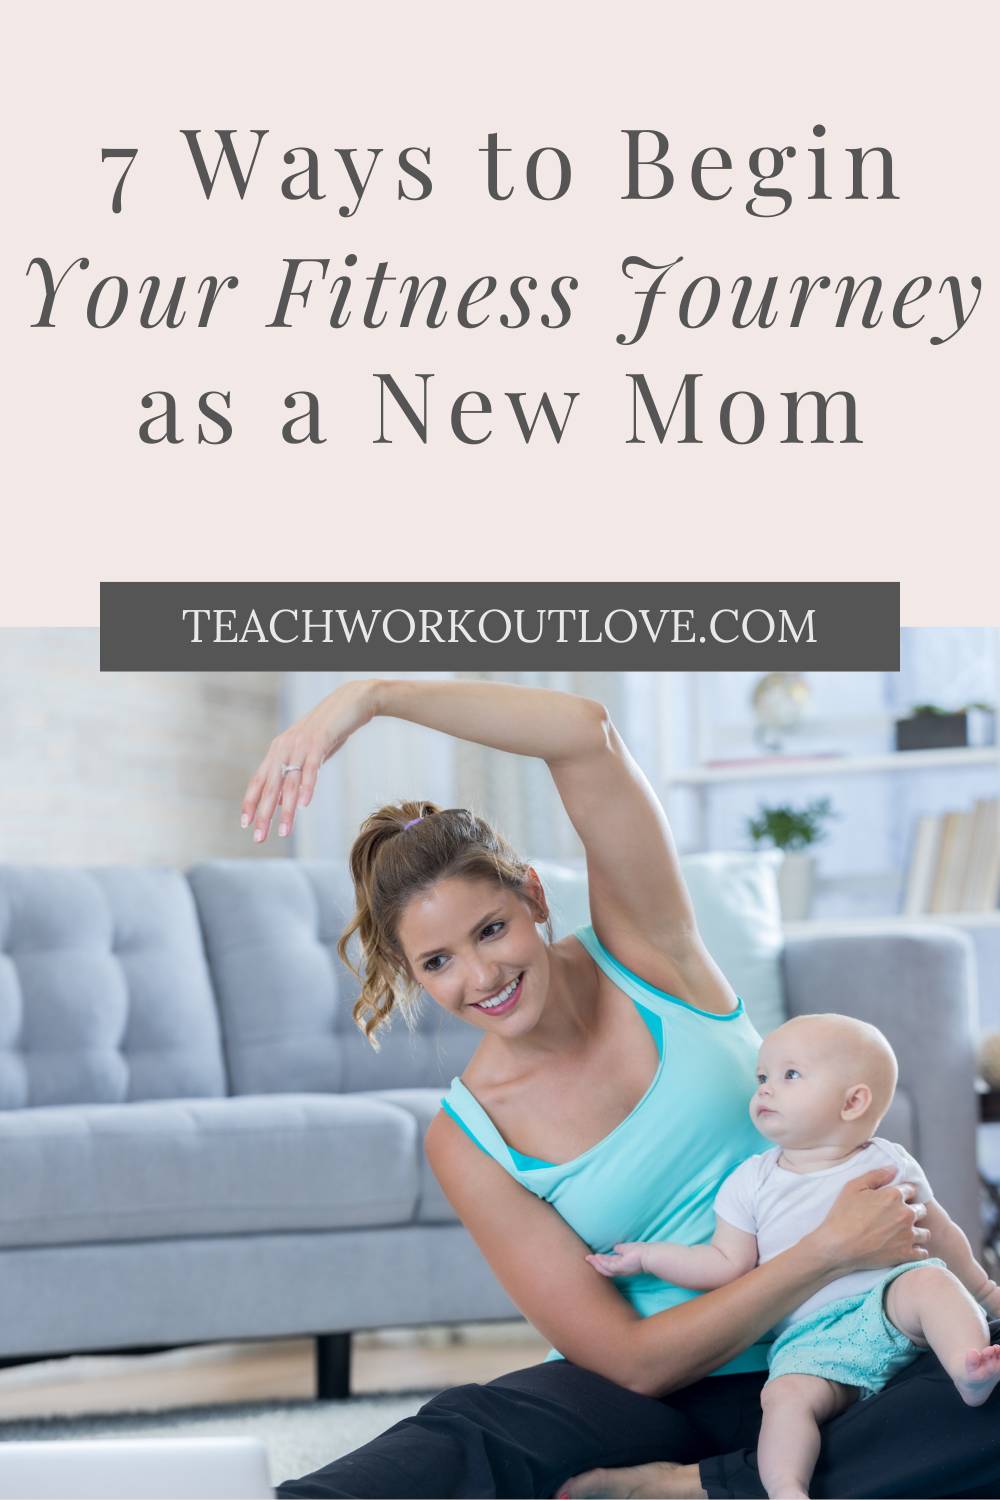 Being a new mom makes it really difficult to begin your fitness journey. Do you feel like you have no time to get anything done, let alone work out!? Here are 7 tips to help you jump start your fitness journey as a new mom.